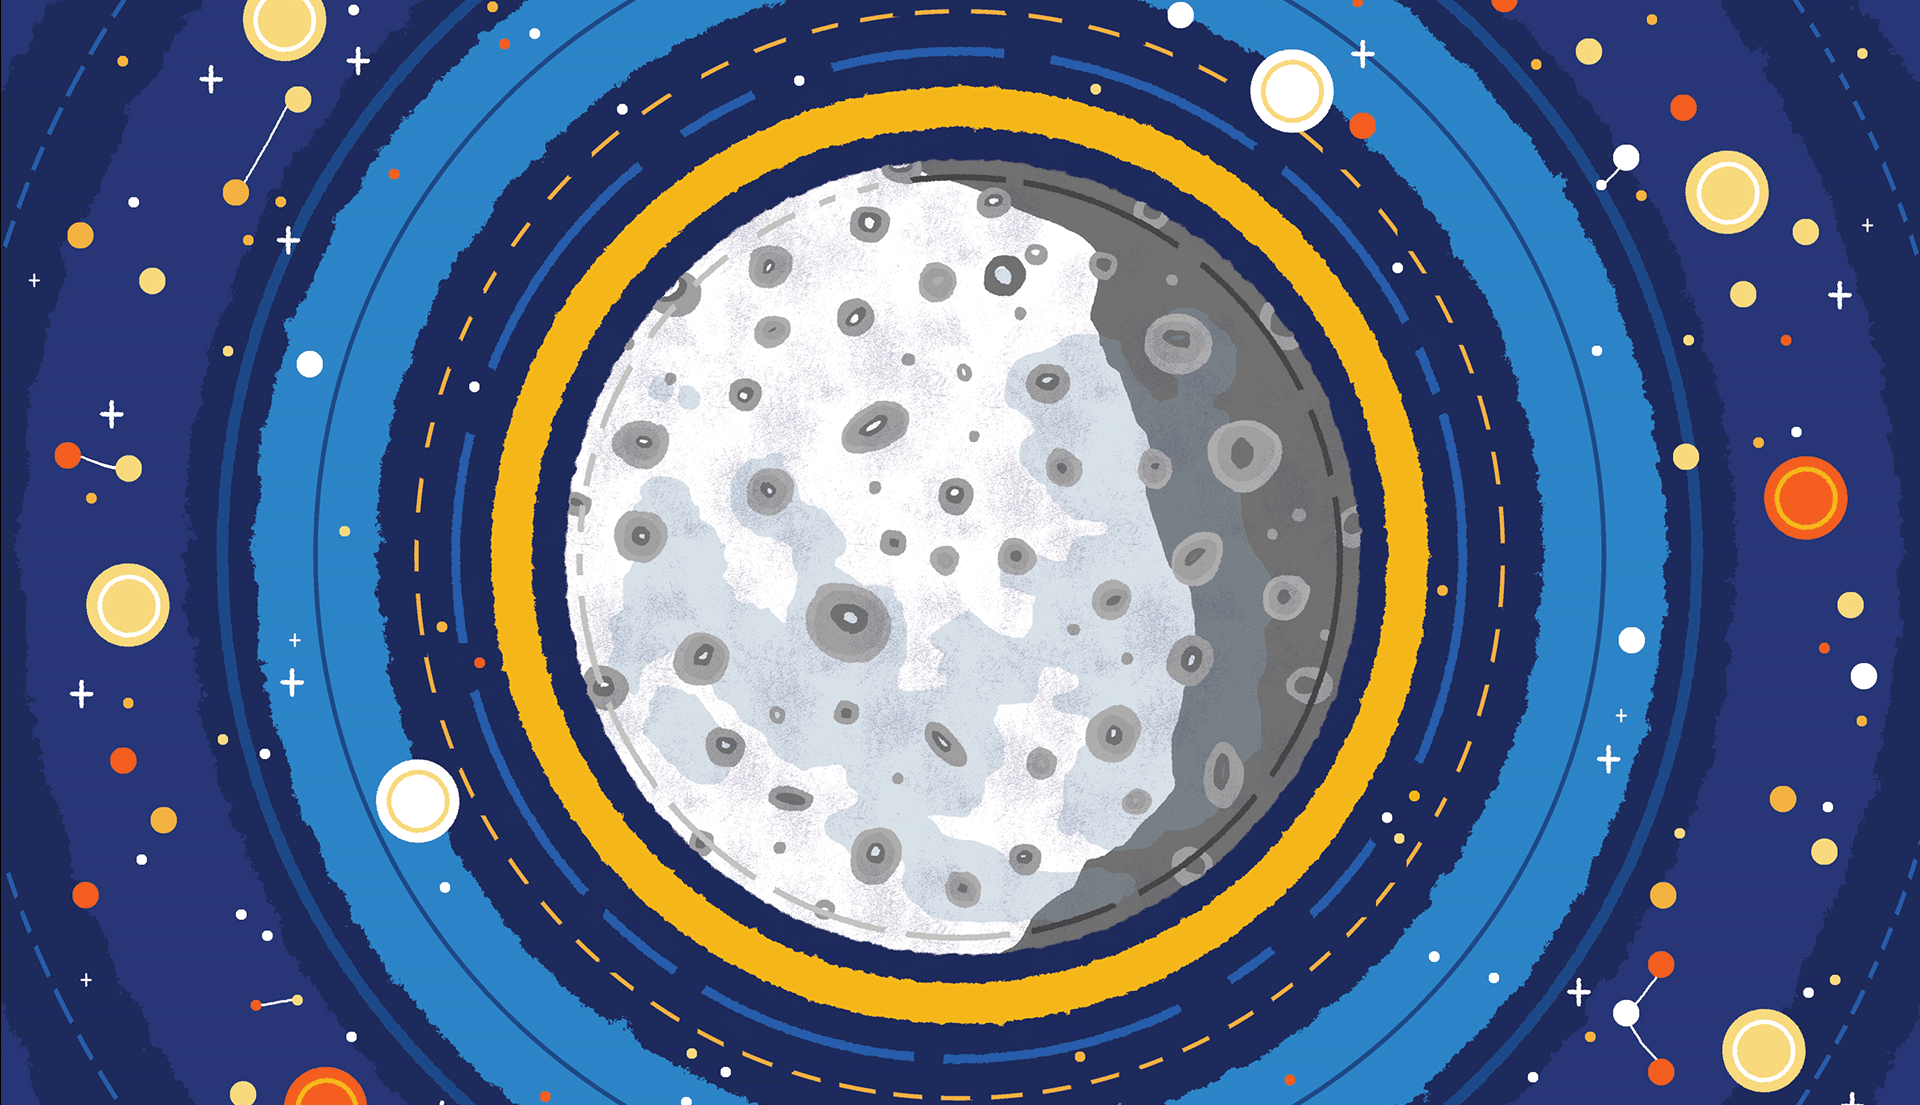 Stylised illustration of the moon with rings and stars surrounding it.